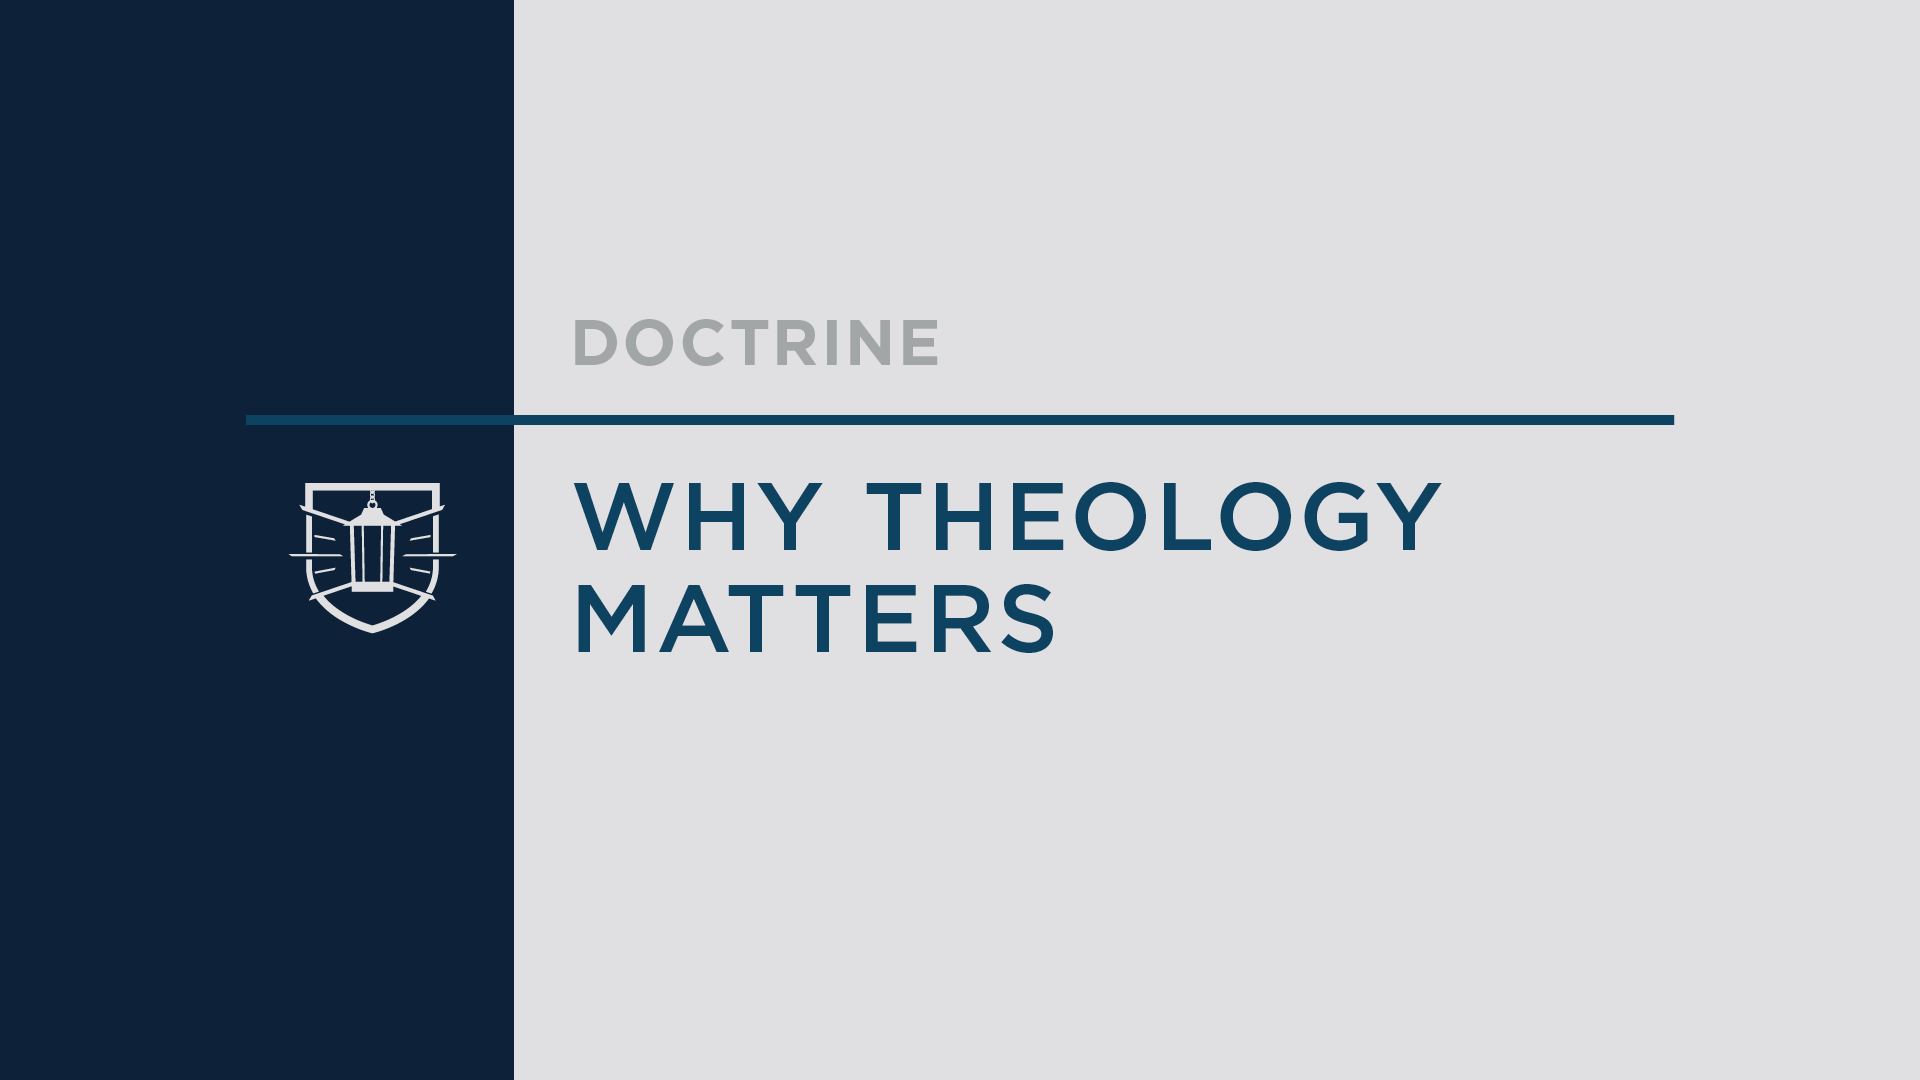 Doctrine 1: Why Theology Matters